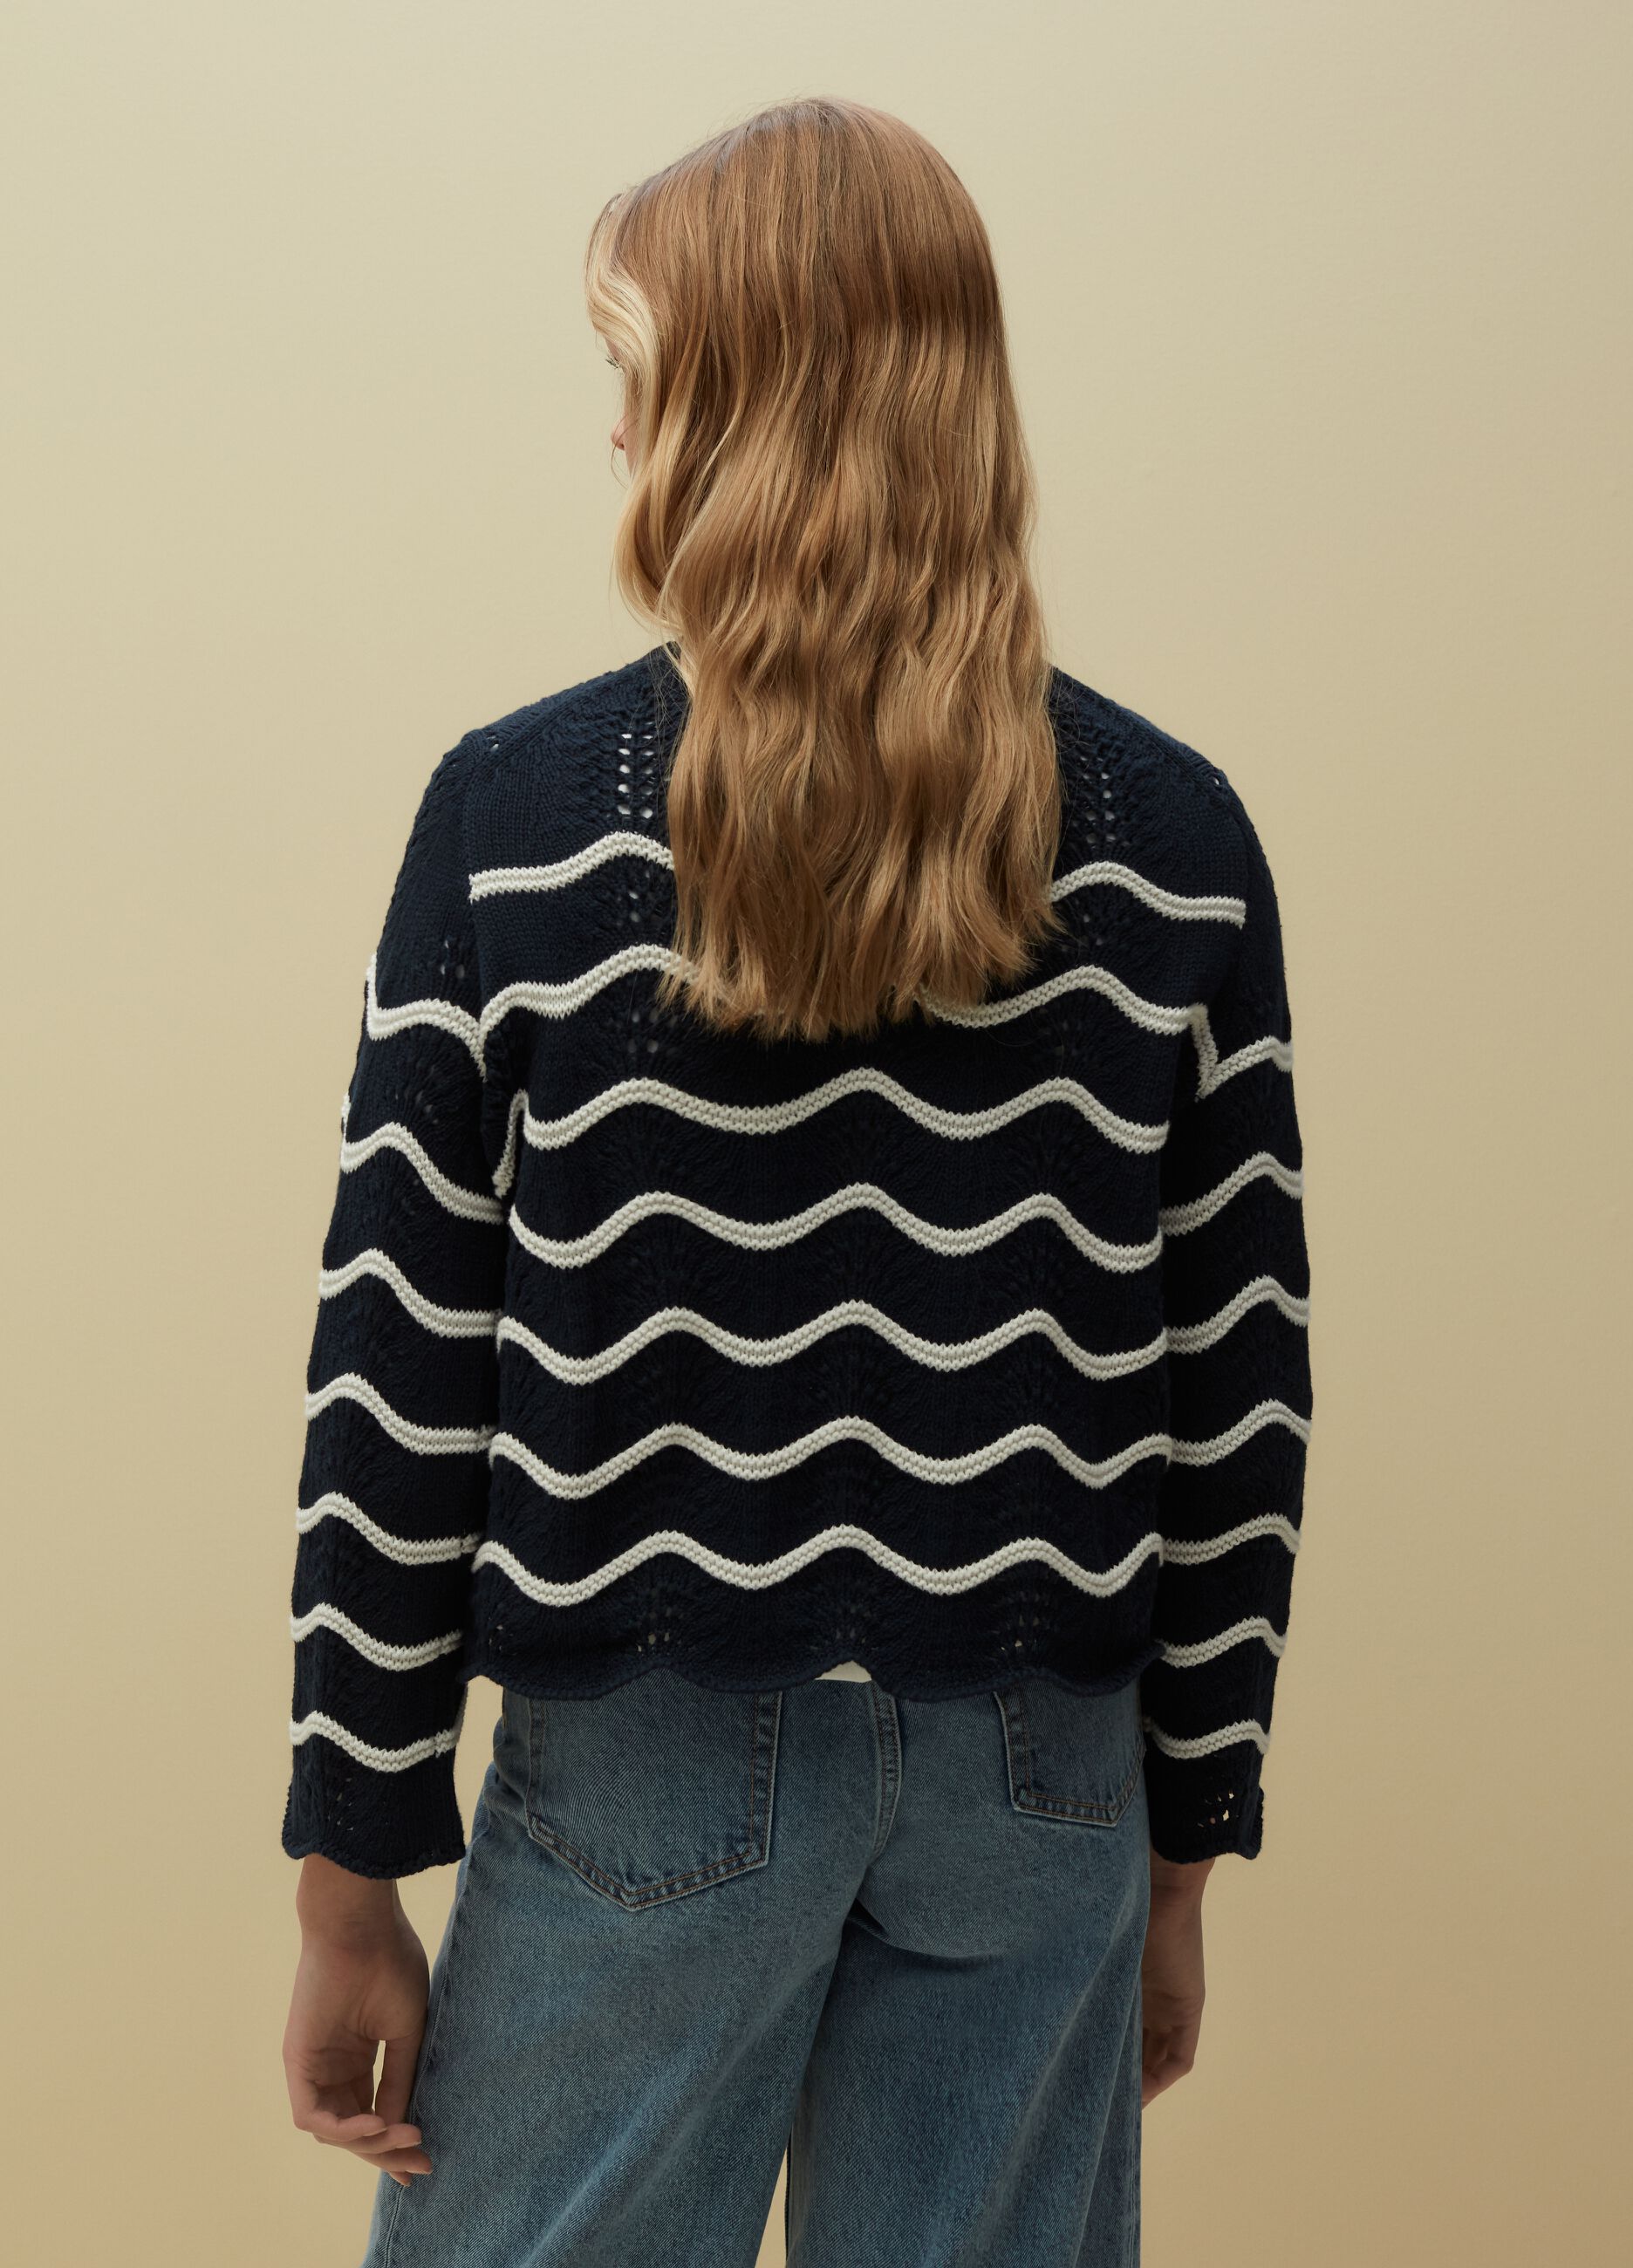 Crochet sweater with waved stripes